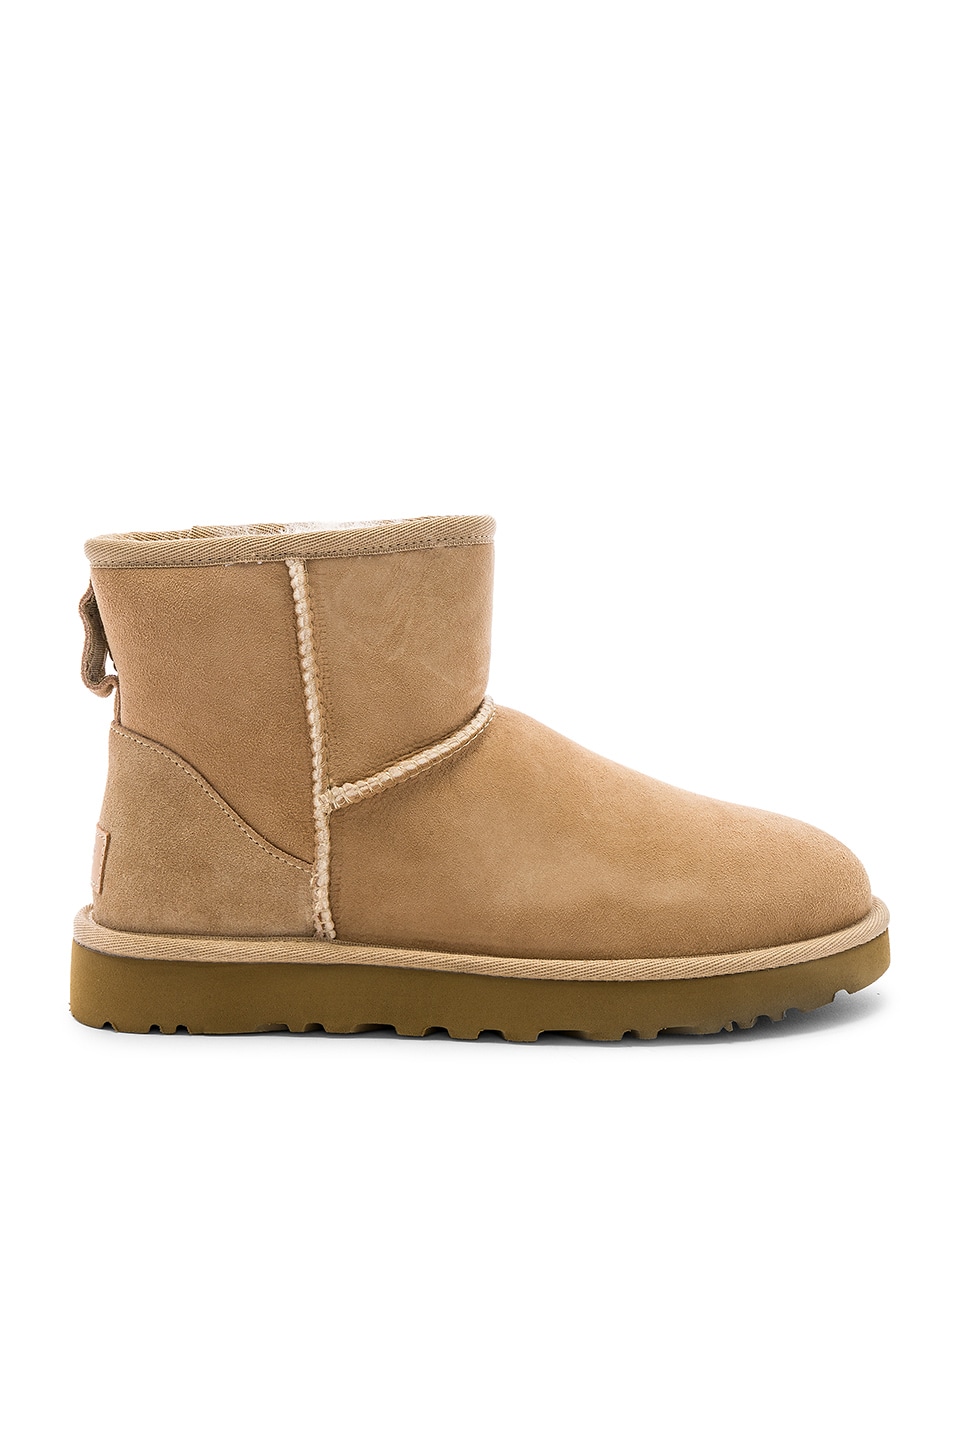 sand colored uggs